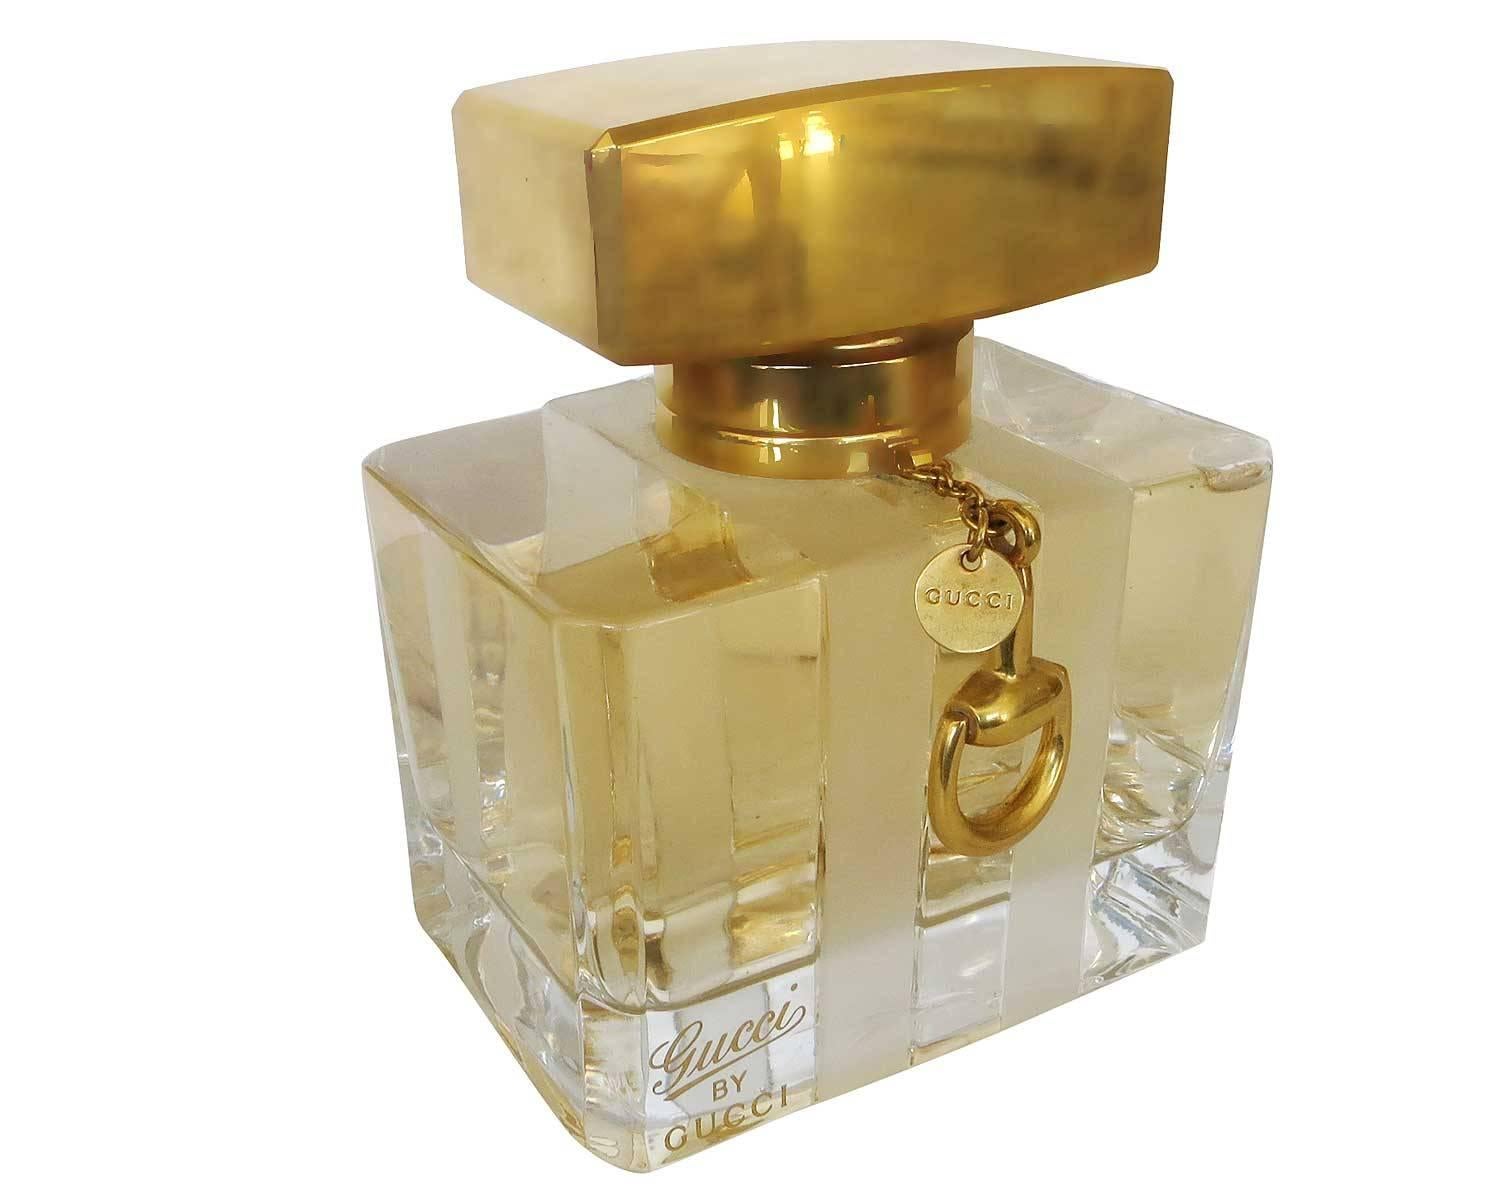 Gucci large-scale crystal factice display bottle. The elegant crystal fragrance bottle was a display from a department store fragrance counter.

The large-scale replica bottle is designed with brass stopper complete with charms bearing the Gucci